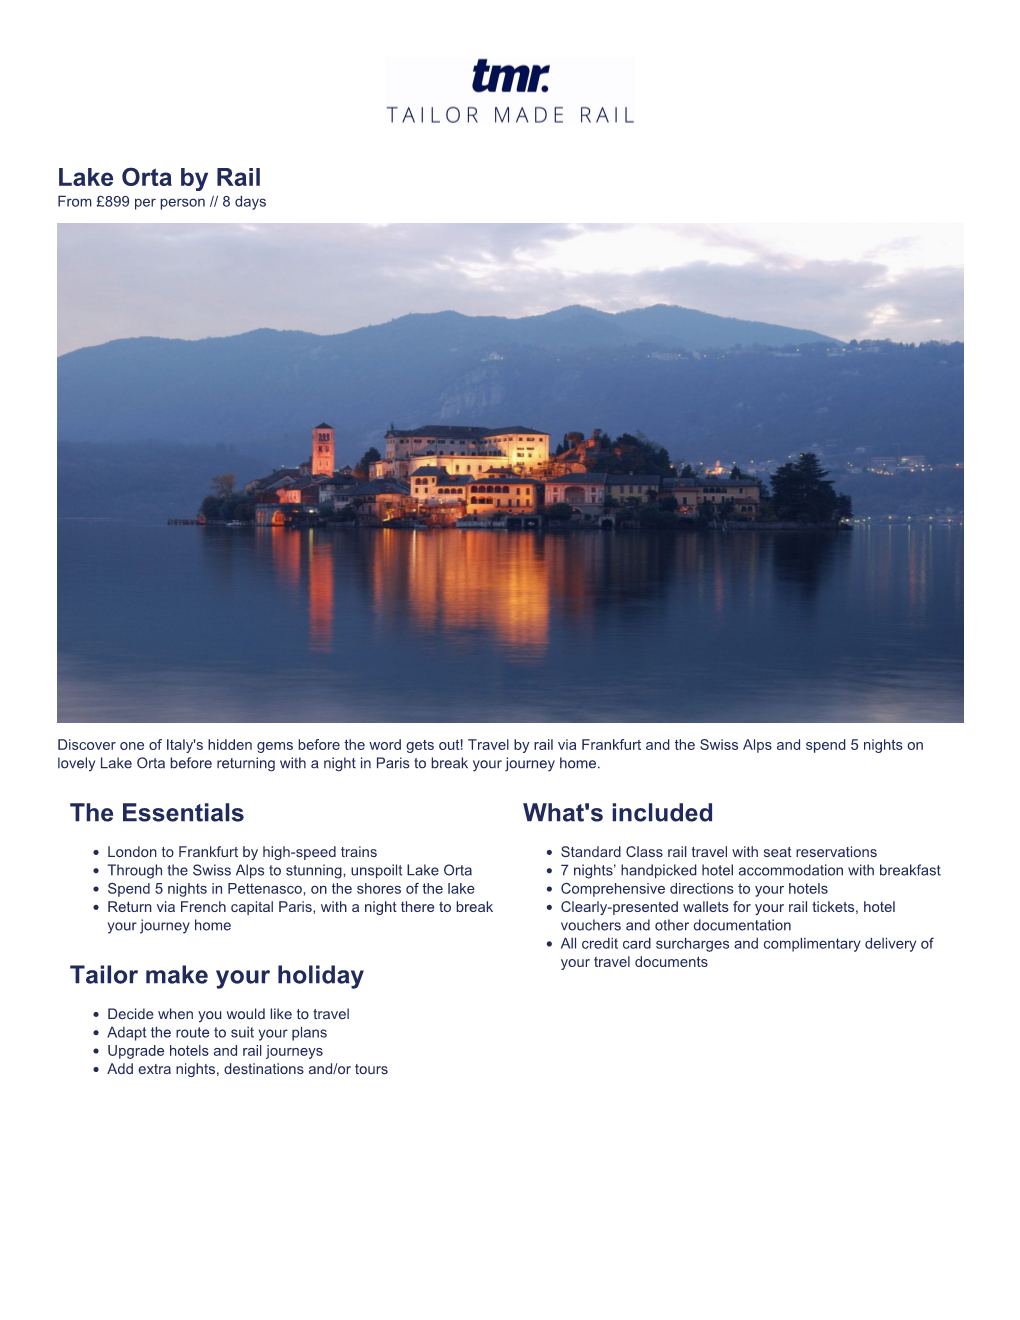 Lake Orta by Rail the Essentials Tailor Make Your Holiday What's